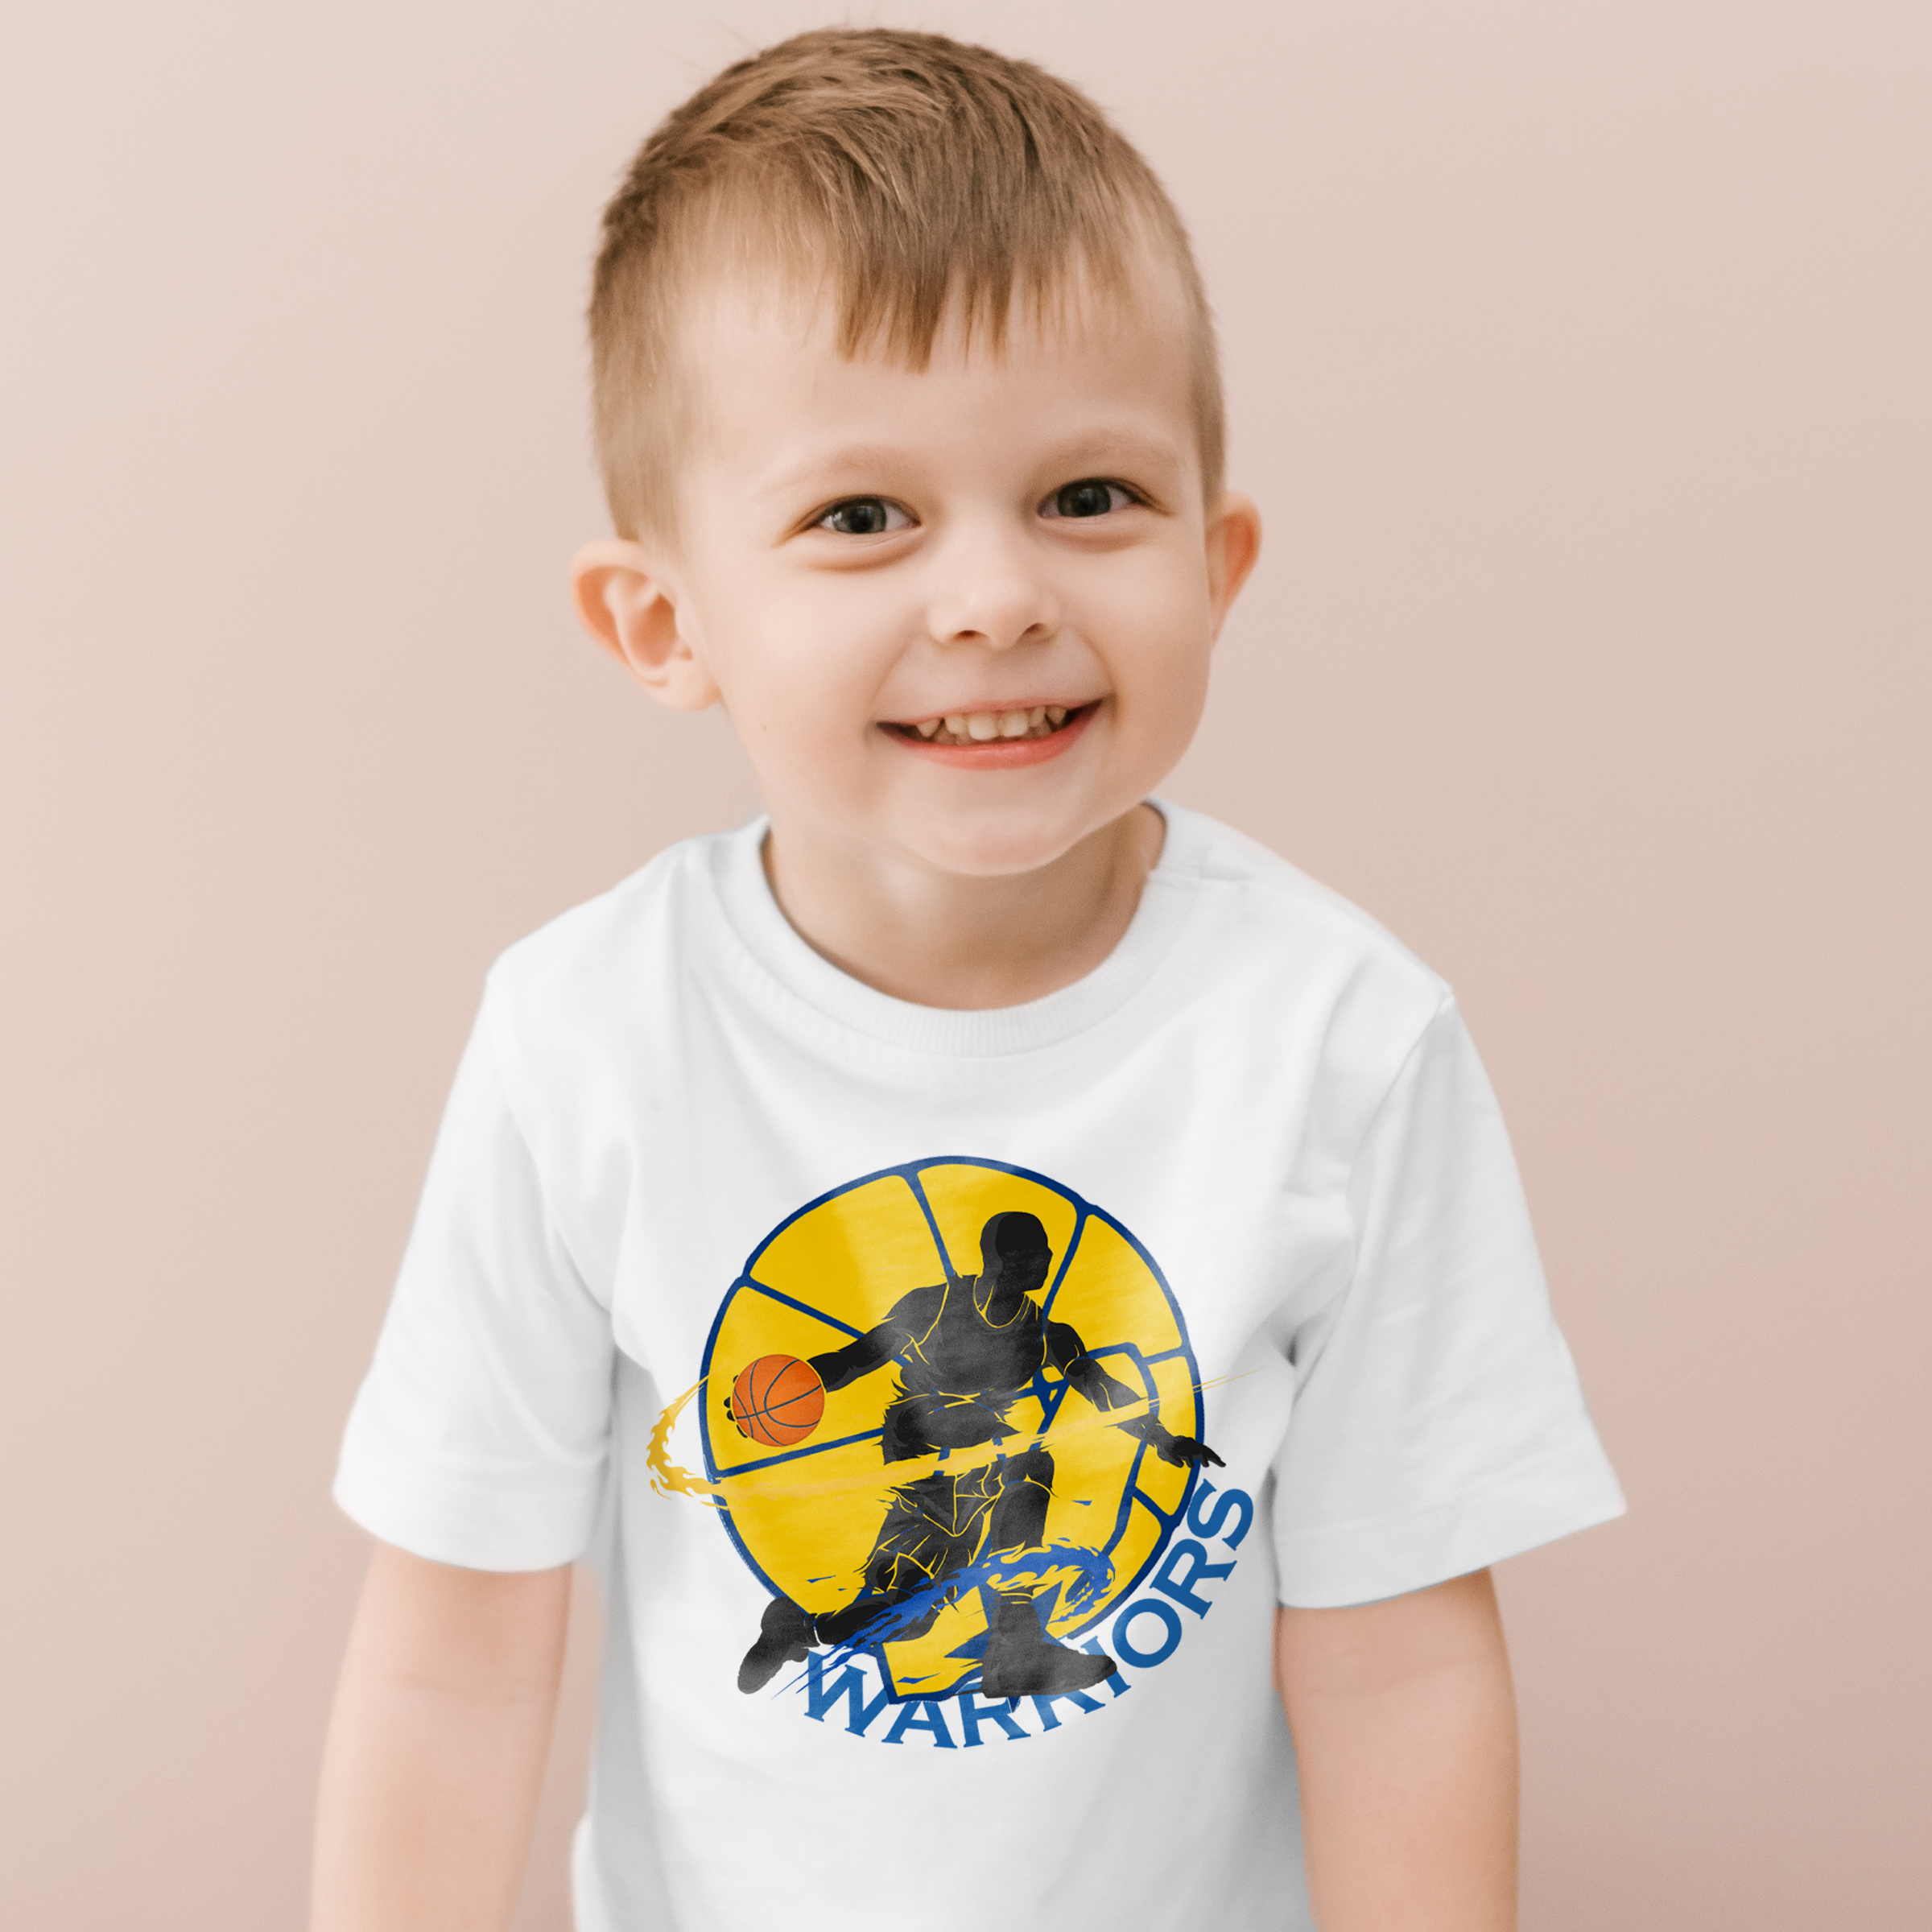 golden state warriors t shirt youth